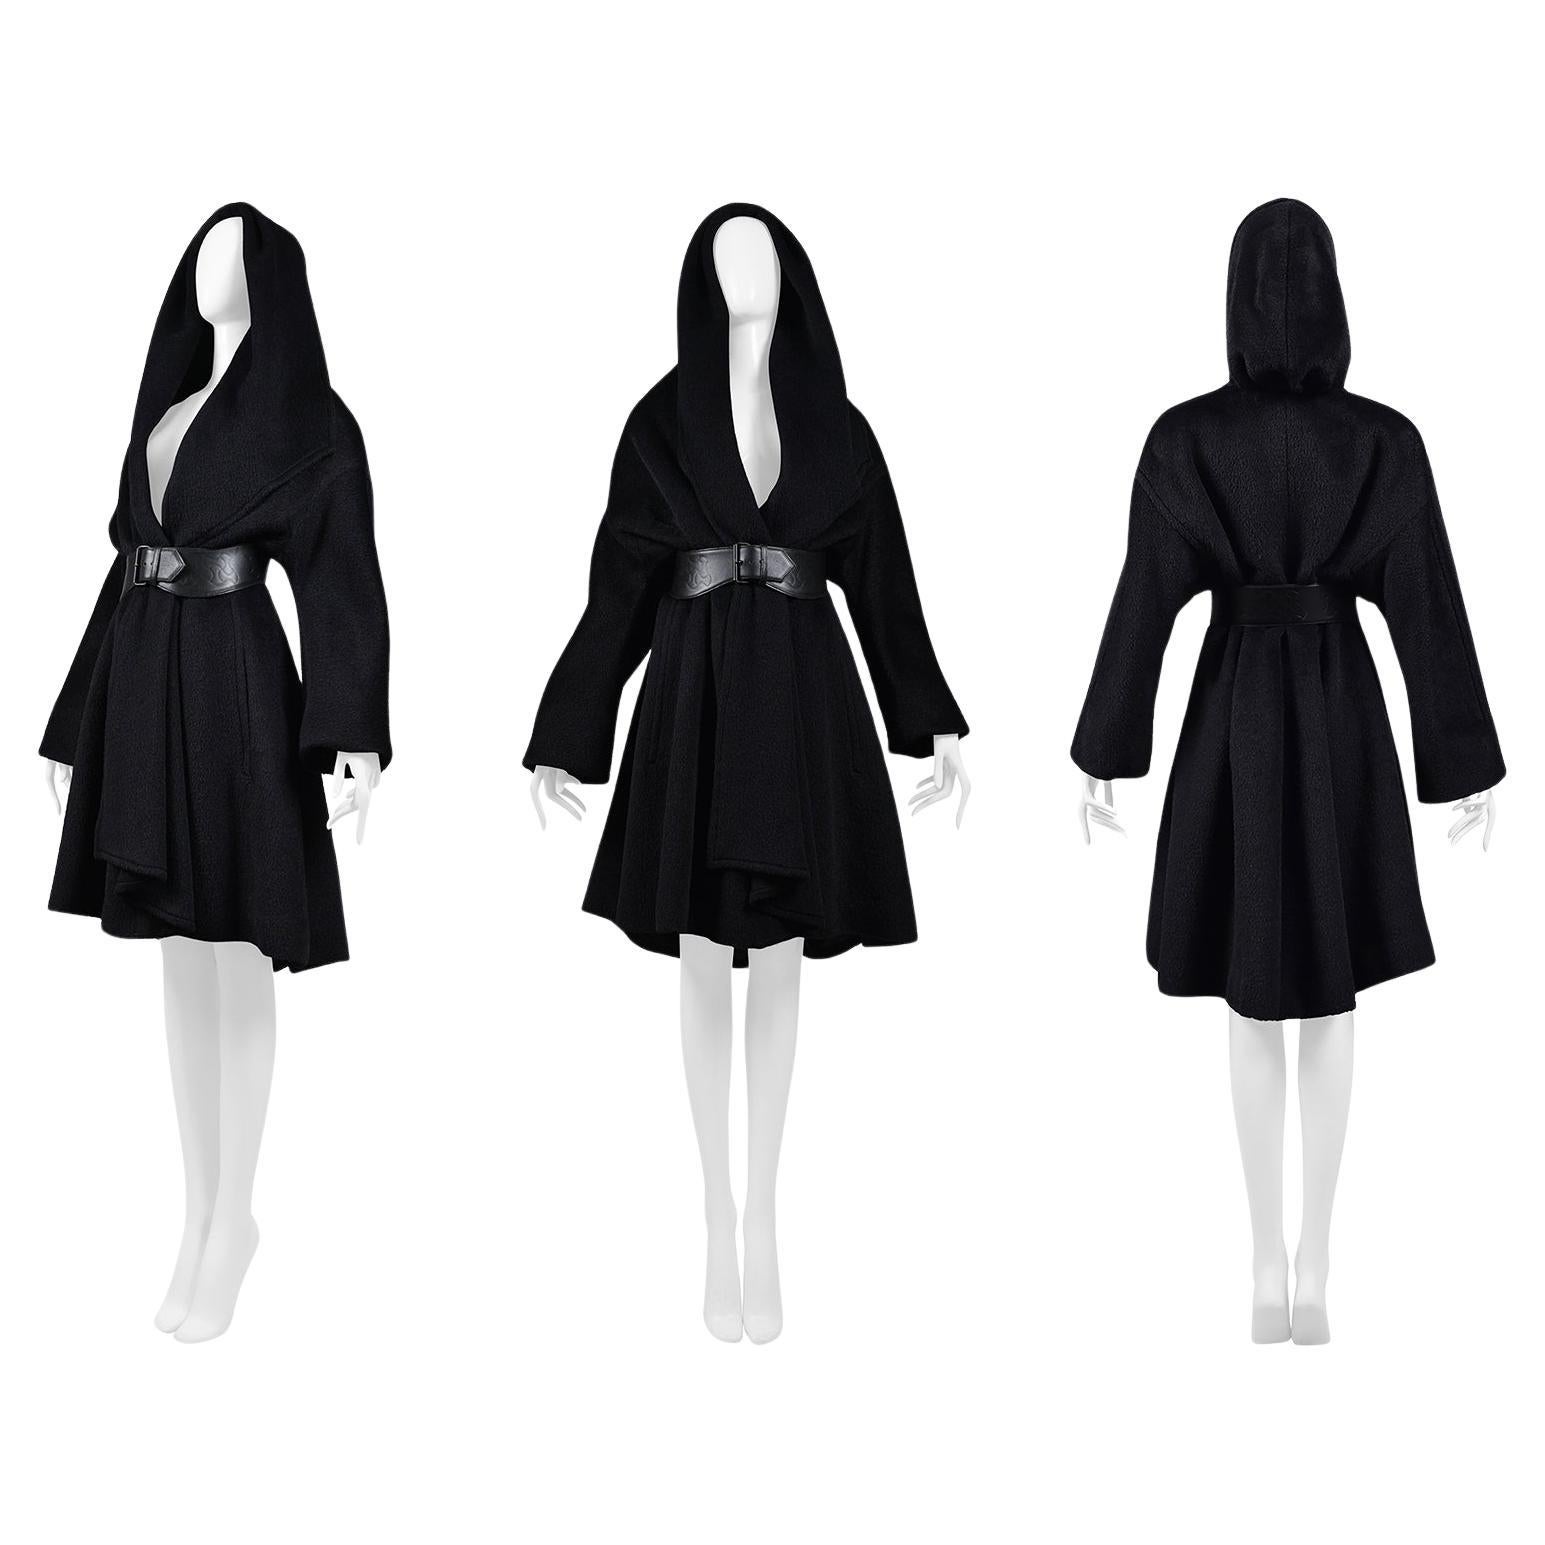 Thierry Mugler Black Alpaca Hooded Cape Coat For Sale